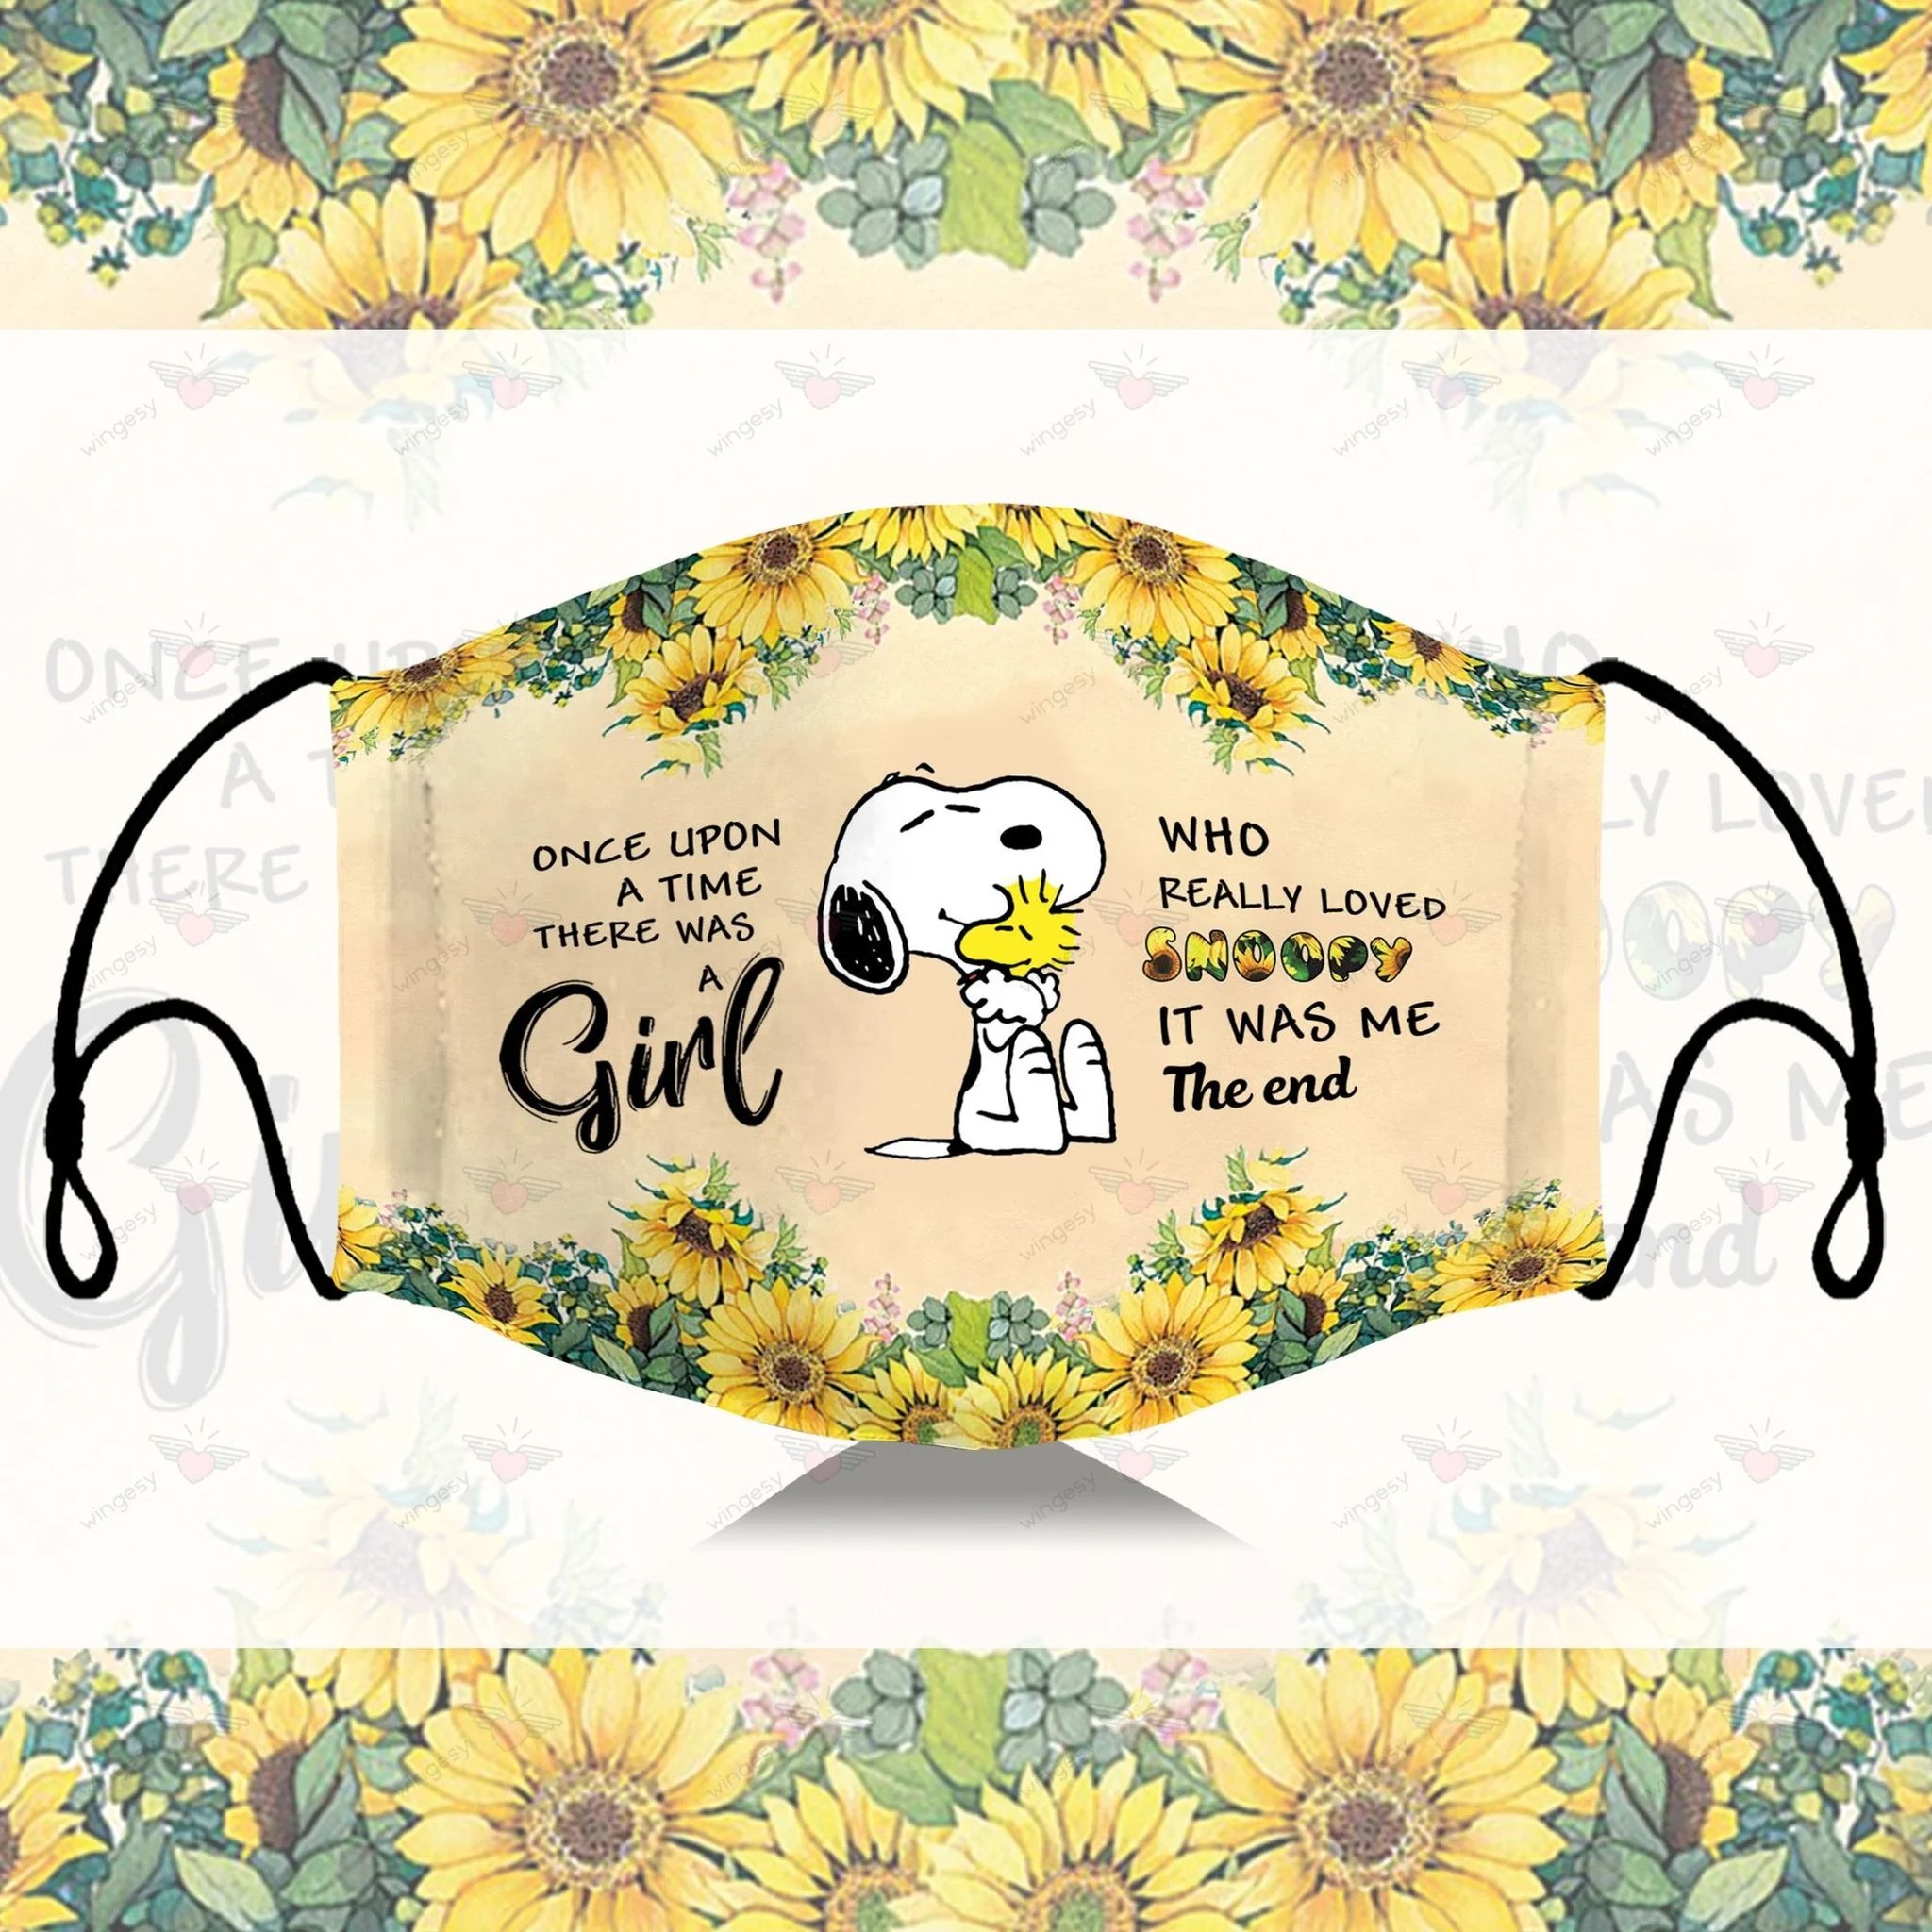 Once upon a time there was a girl who really loved snoopy It was me sunflower face mask